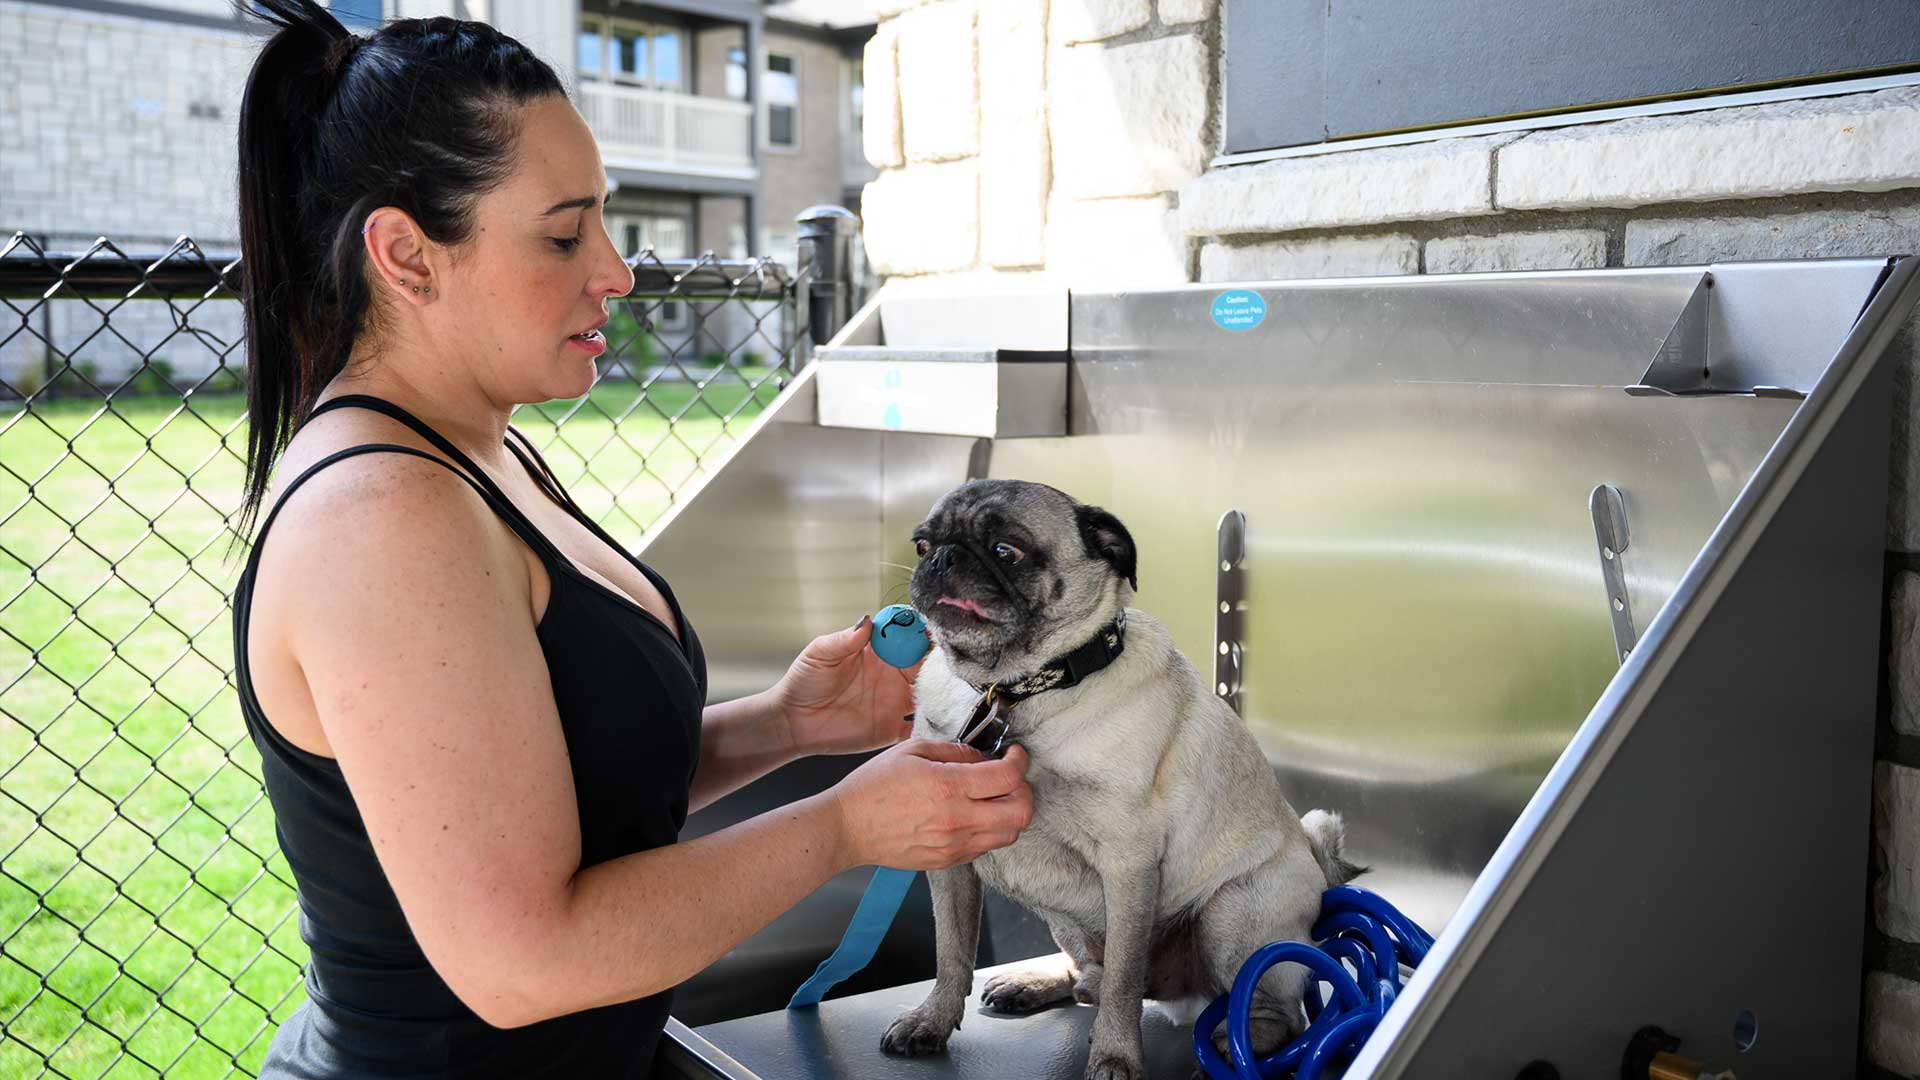 Pet Wash Station with Pug Dog and Owner in Car Car Center Amenity 